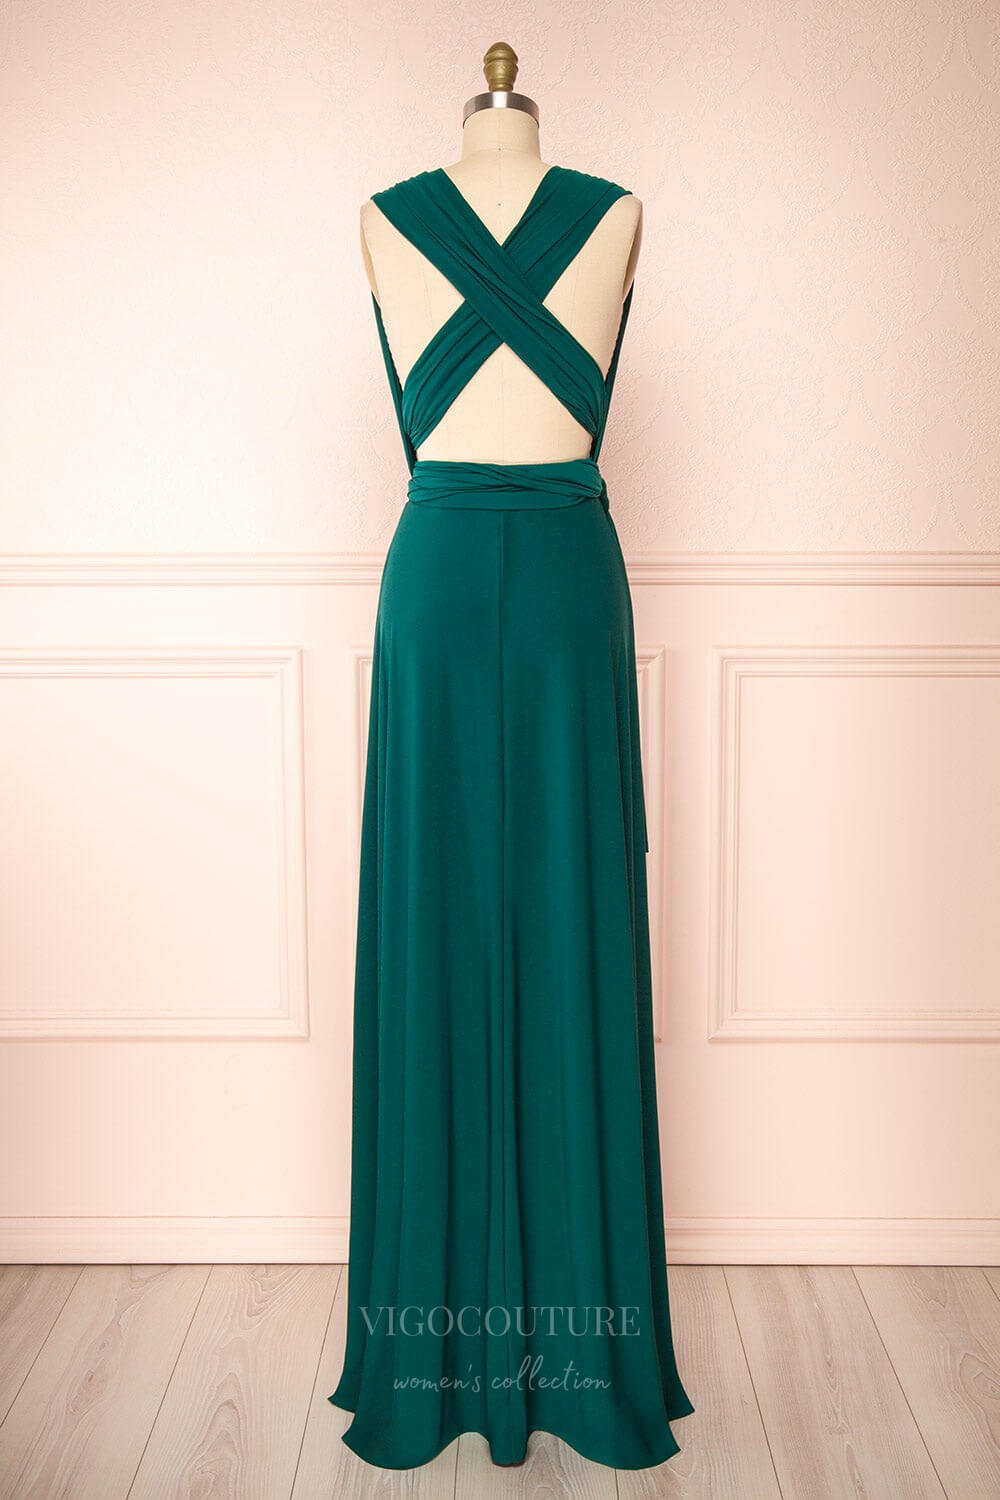 vigocouture-Convertible Bridesmaid Dress Stretchable Woven Dress Pleated Prom Dress Multiway Dress 20860-Green-Prom Dresses-vigocouture-